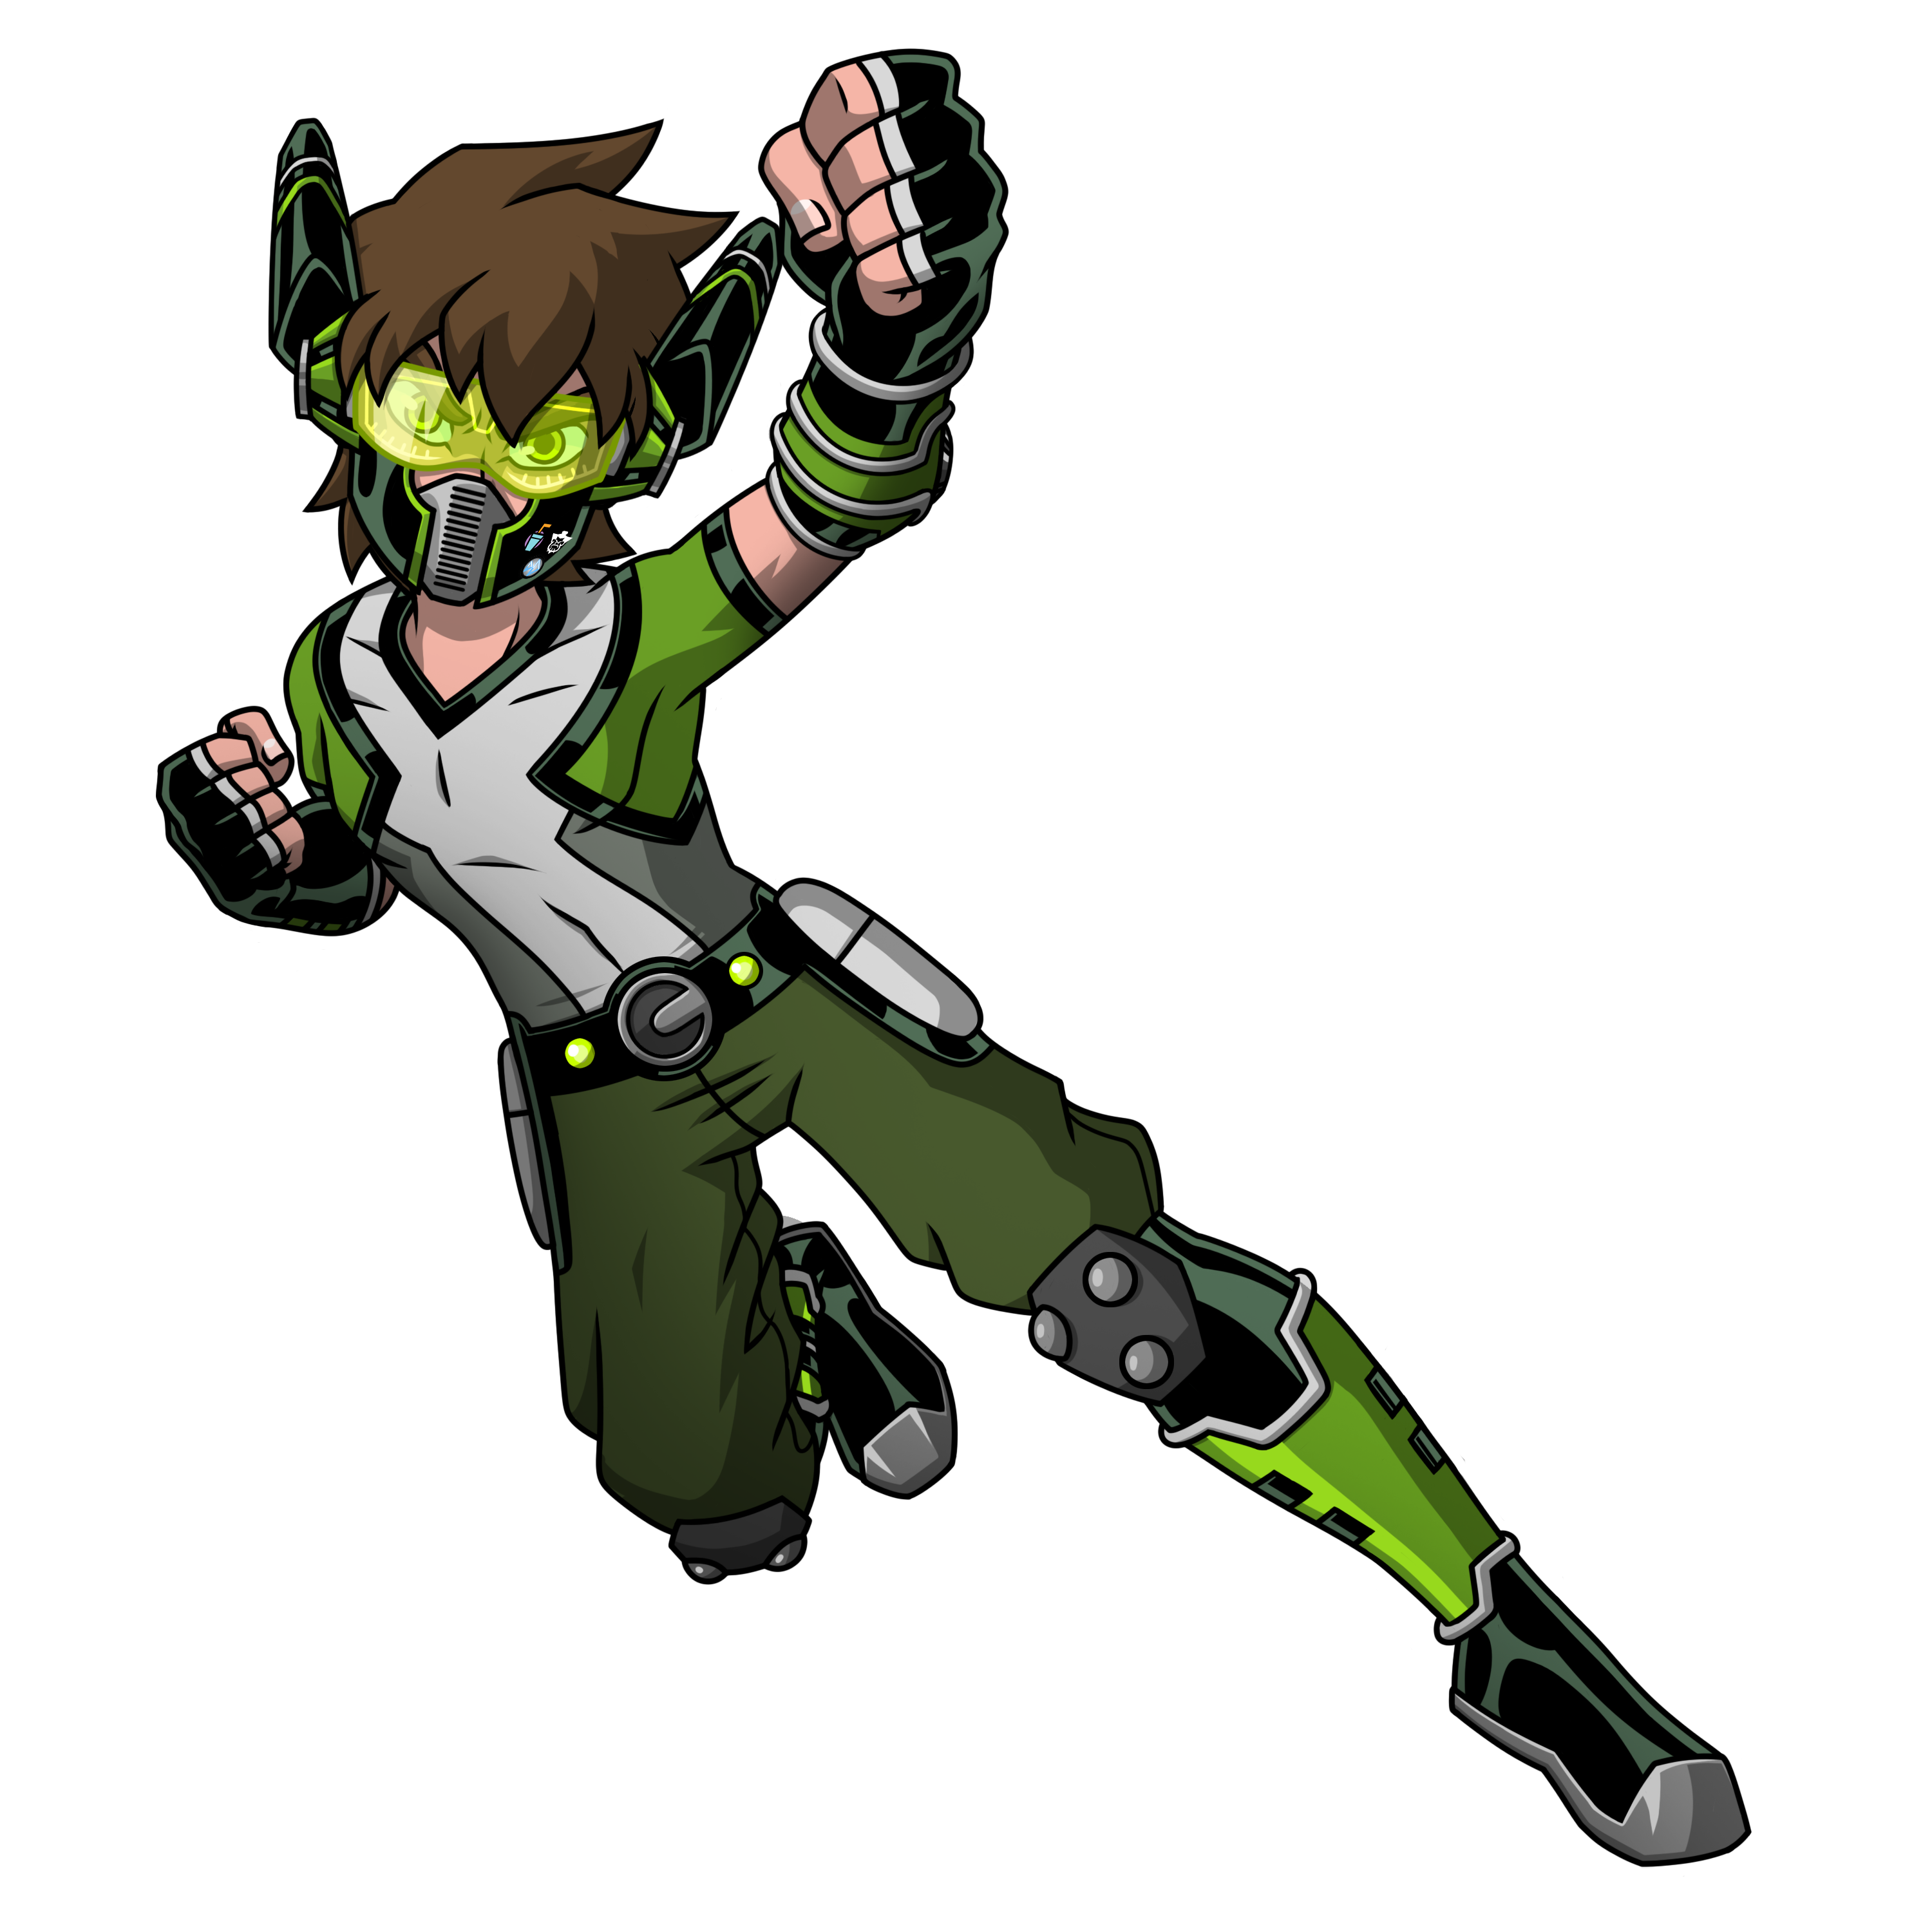 Discover more than 60 ben 10 anime style best - awesomeenglish.edu.vn